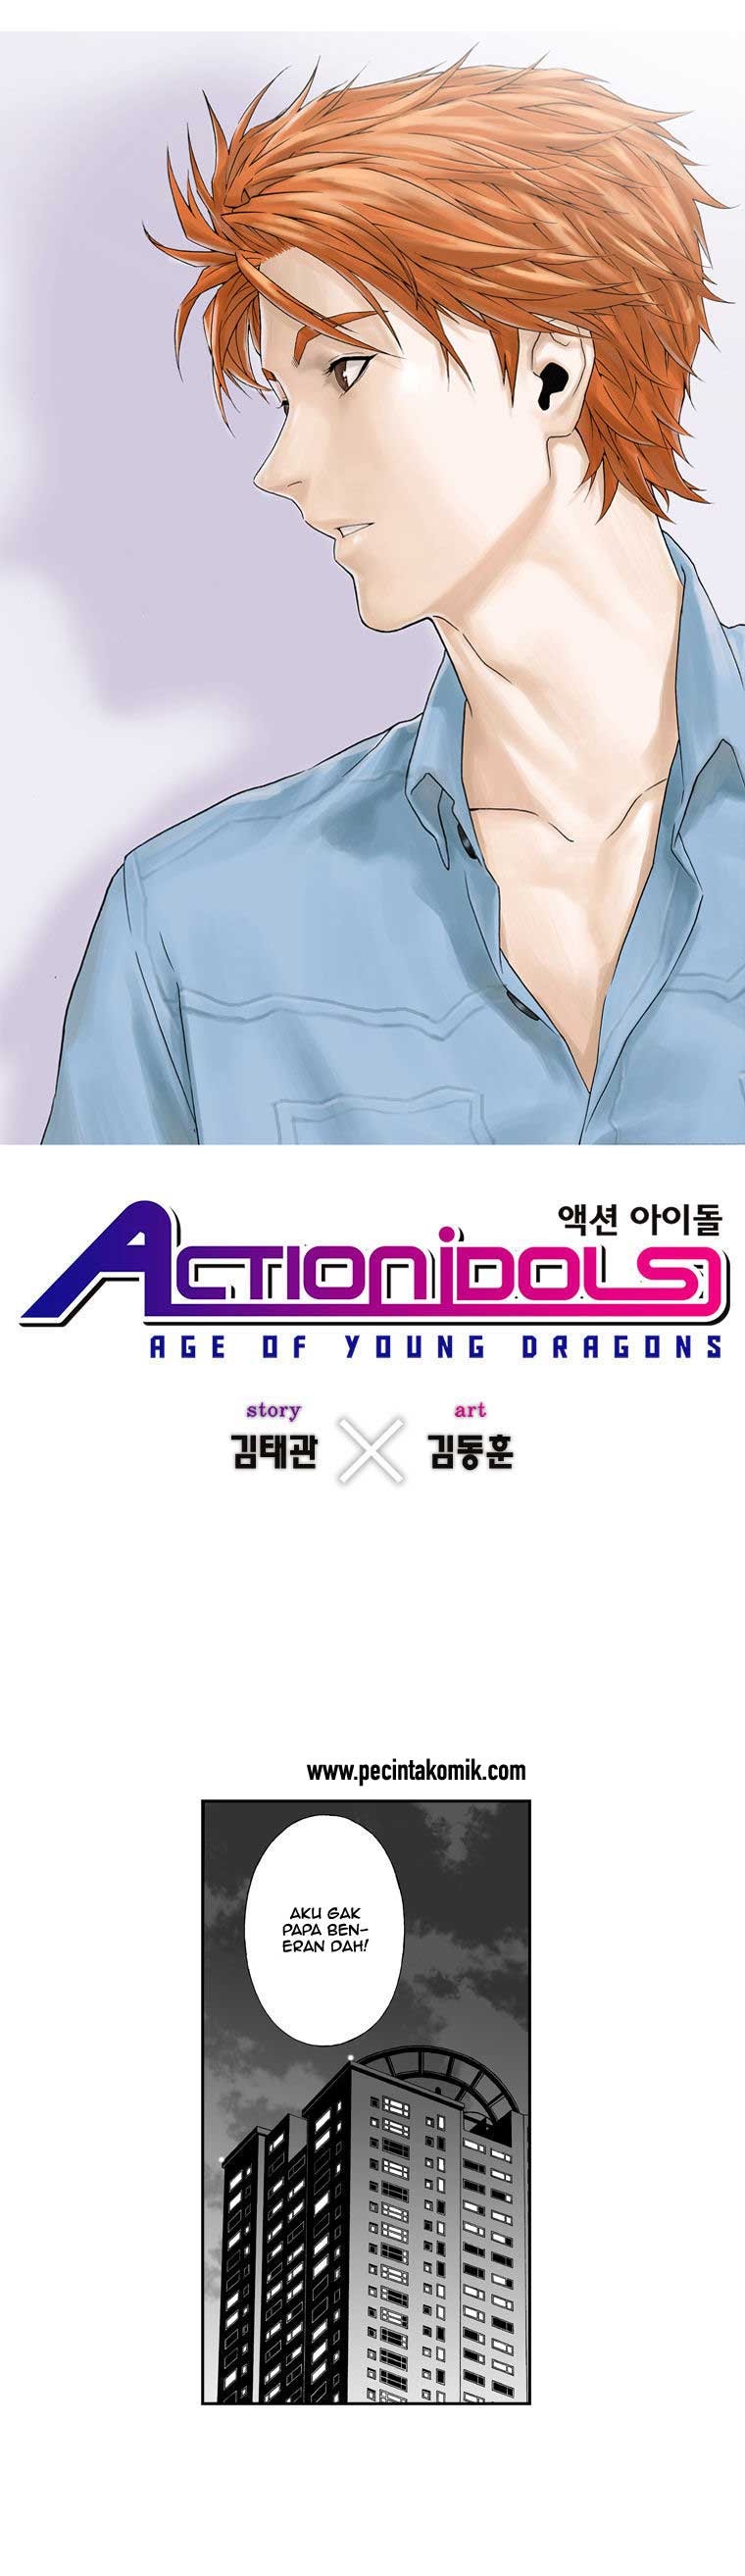 Action Idols – Age of Young Dragons Chapter 11